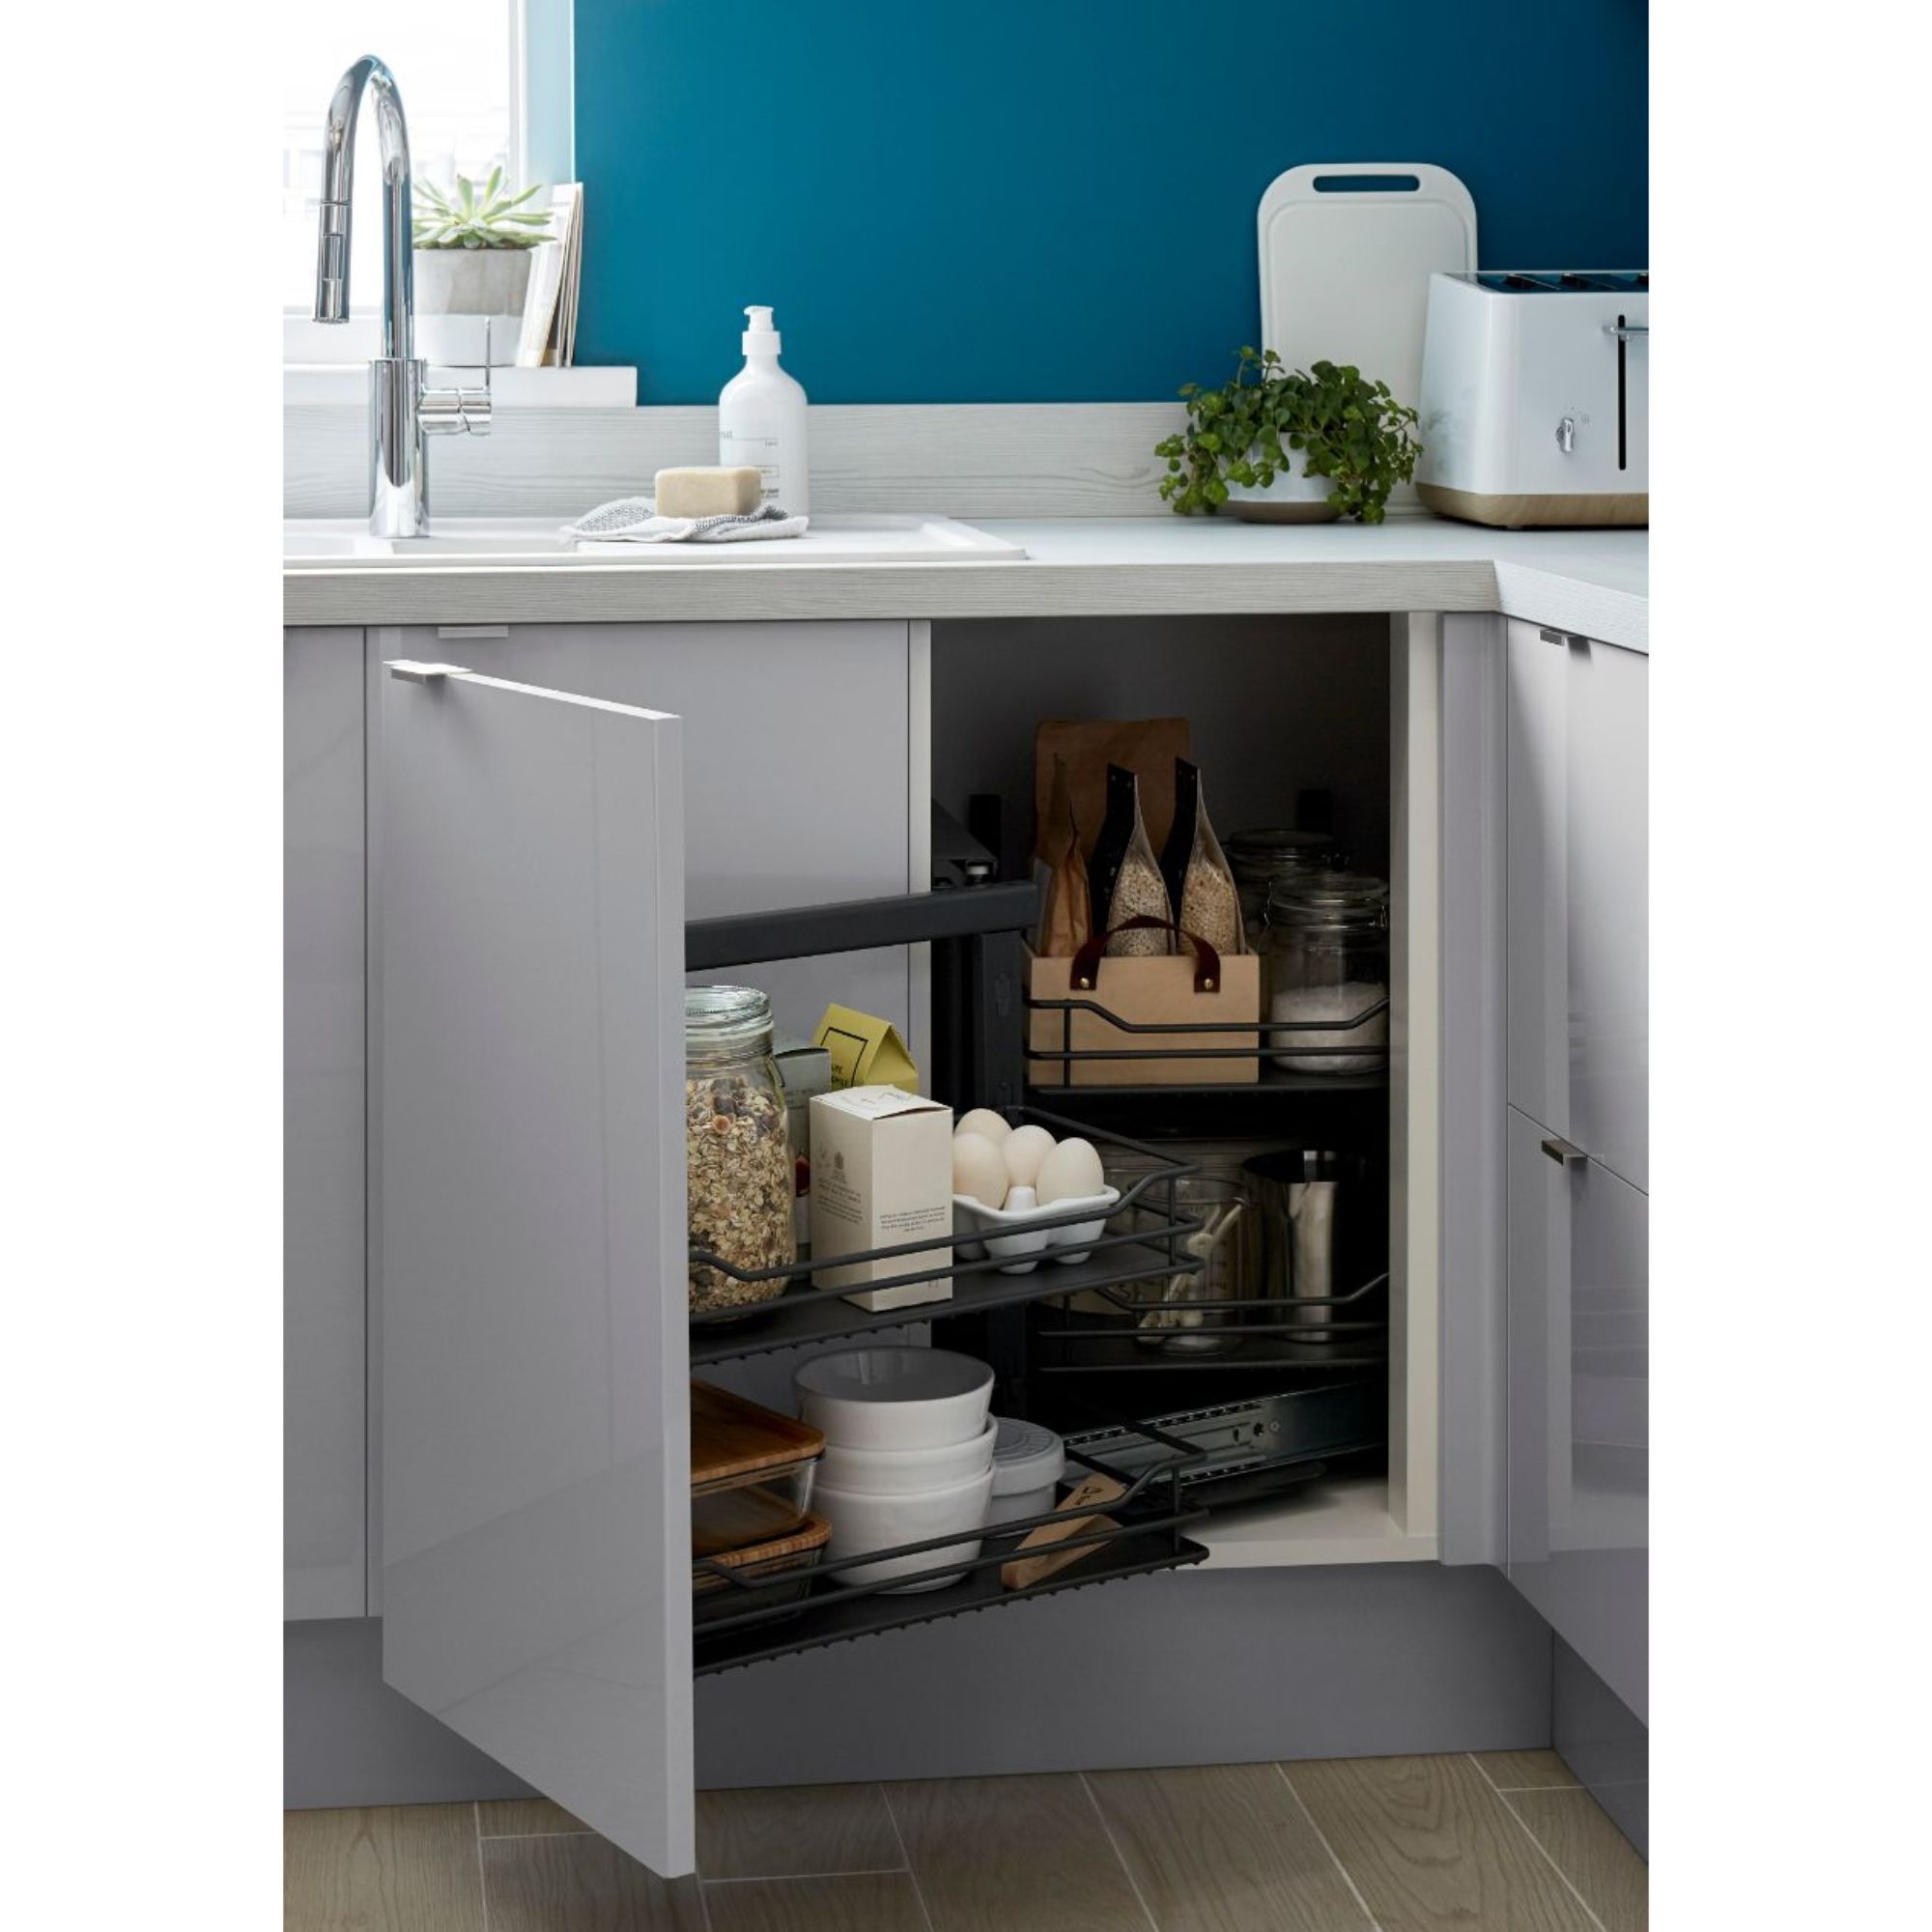 GoodHome Anthracite Soft-open Right outward Pull-out storage, (H)639mm (W)855mm